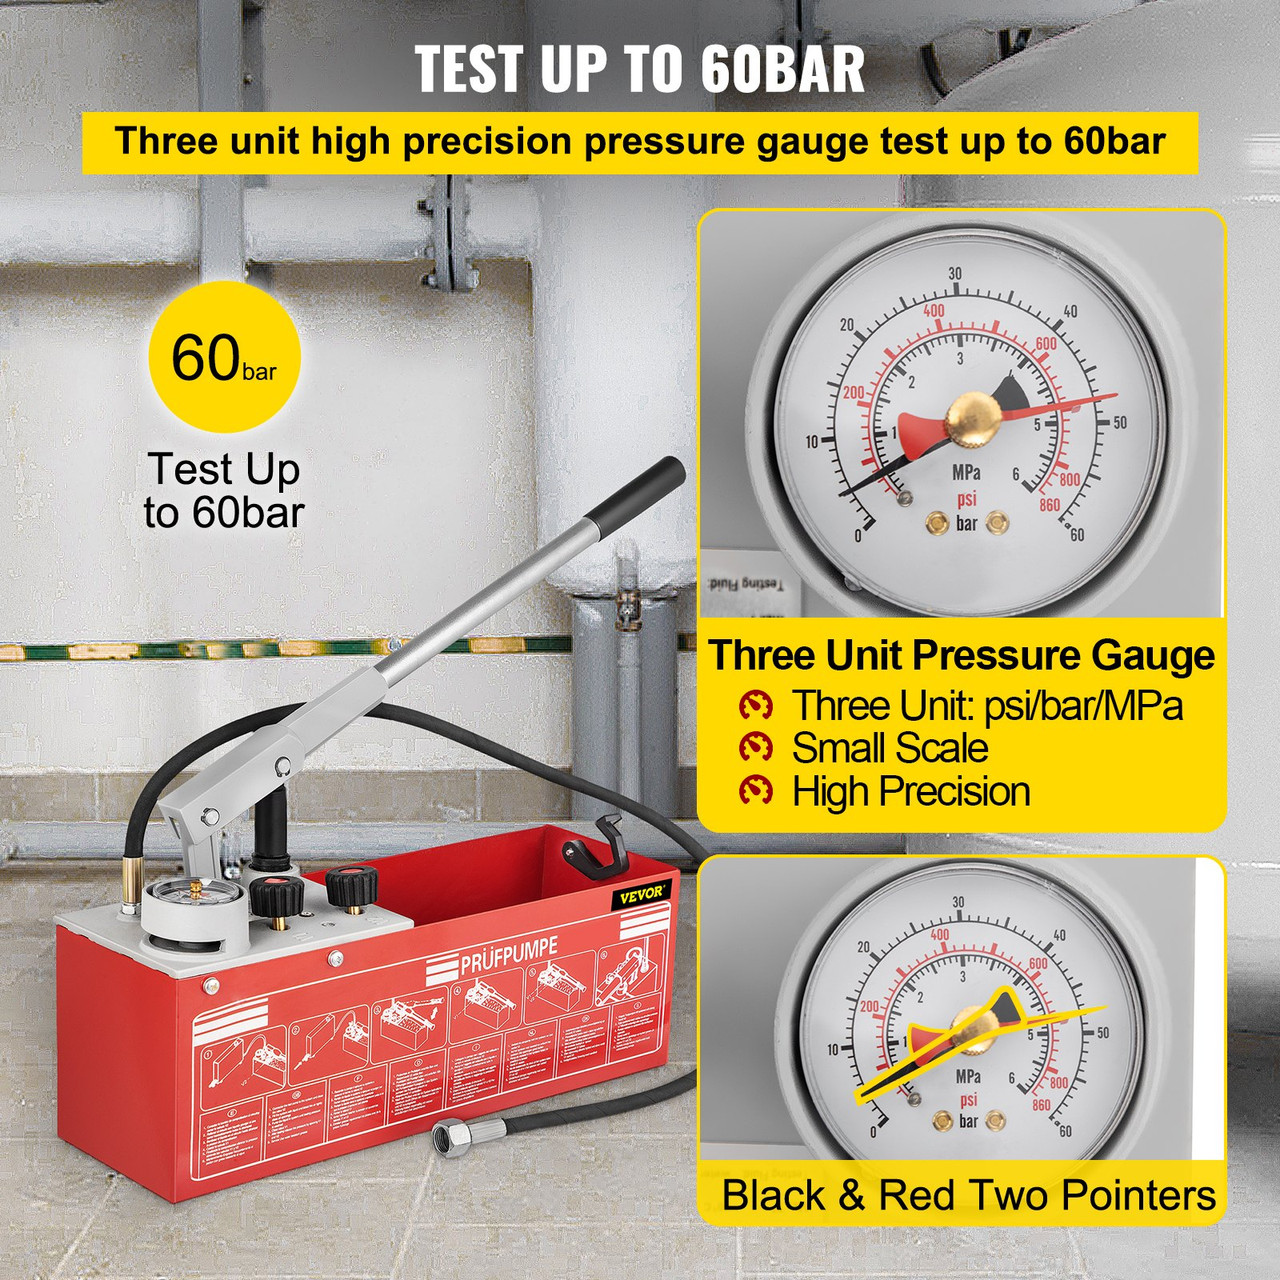 Hydrostatic Pressure Test Pump, Test Up to 60 bar/860 psi, 3.2 Gallon Tank, Hydraulic Manual Water Pressure Tester Kit w/Three-Unit Gauge & R 1/2" Connection for Pipeline Fluid Pressure Testing